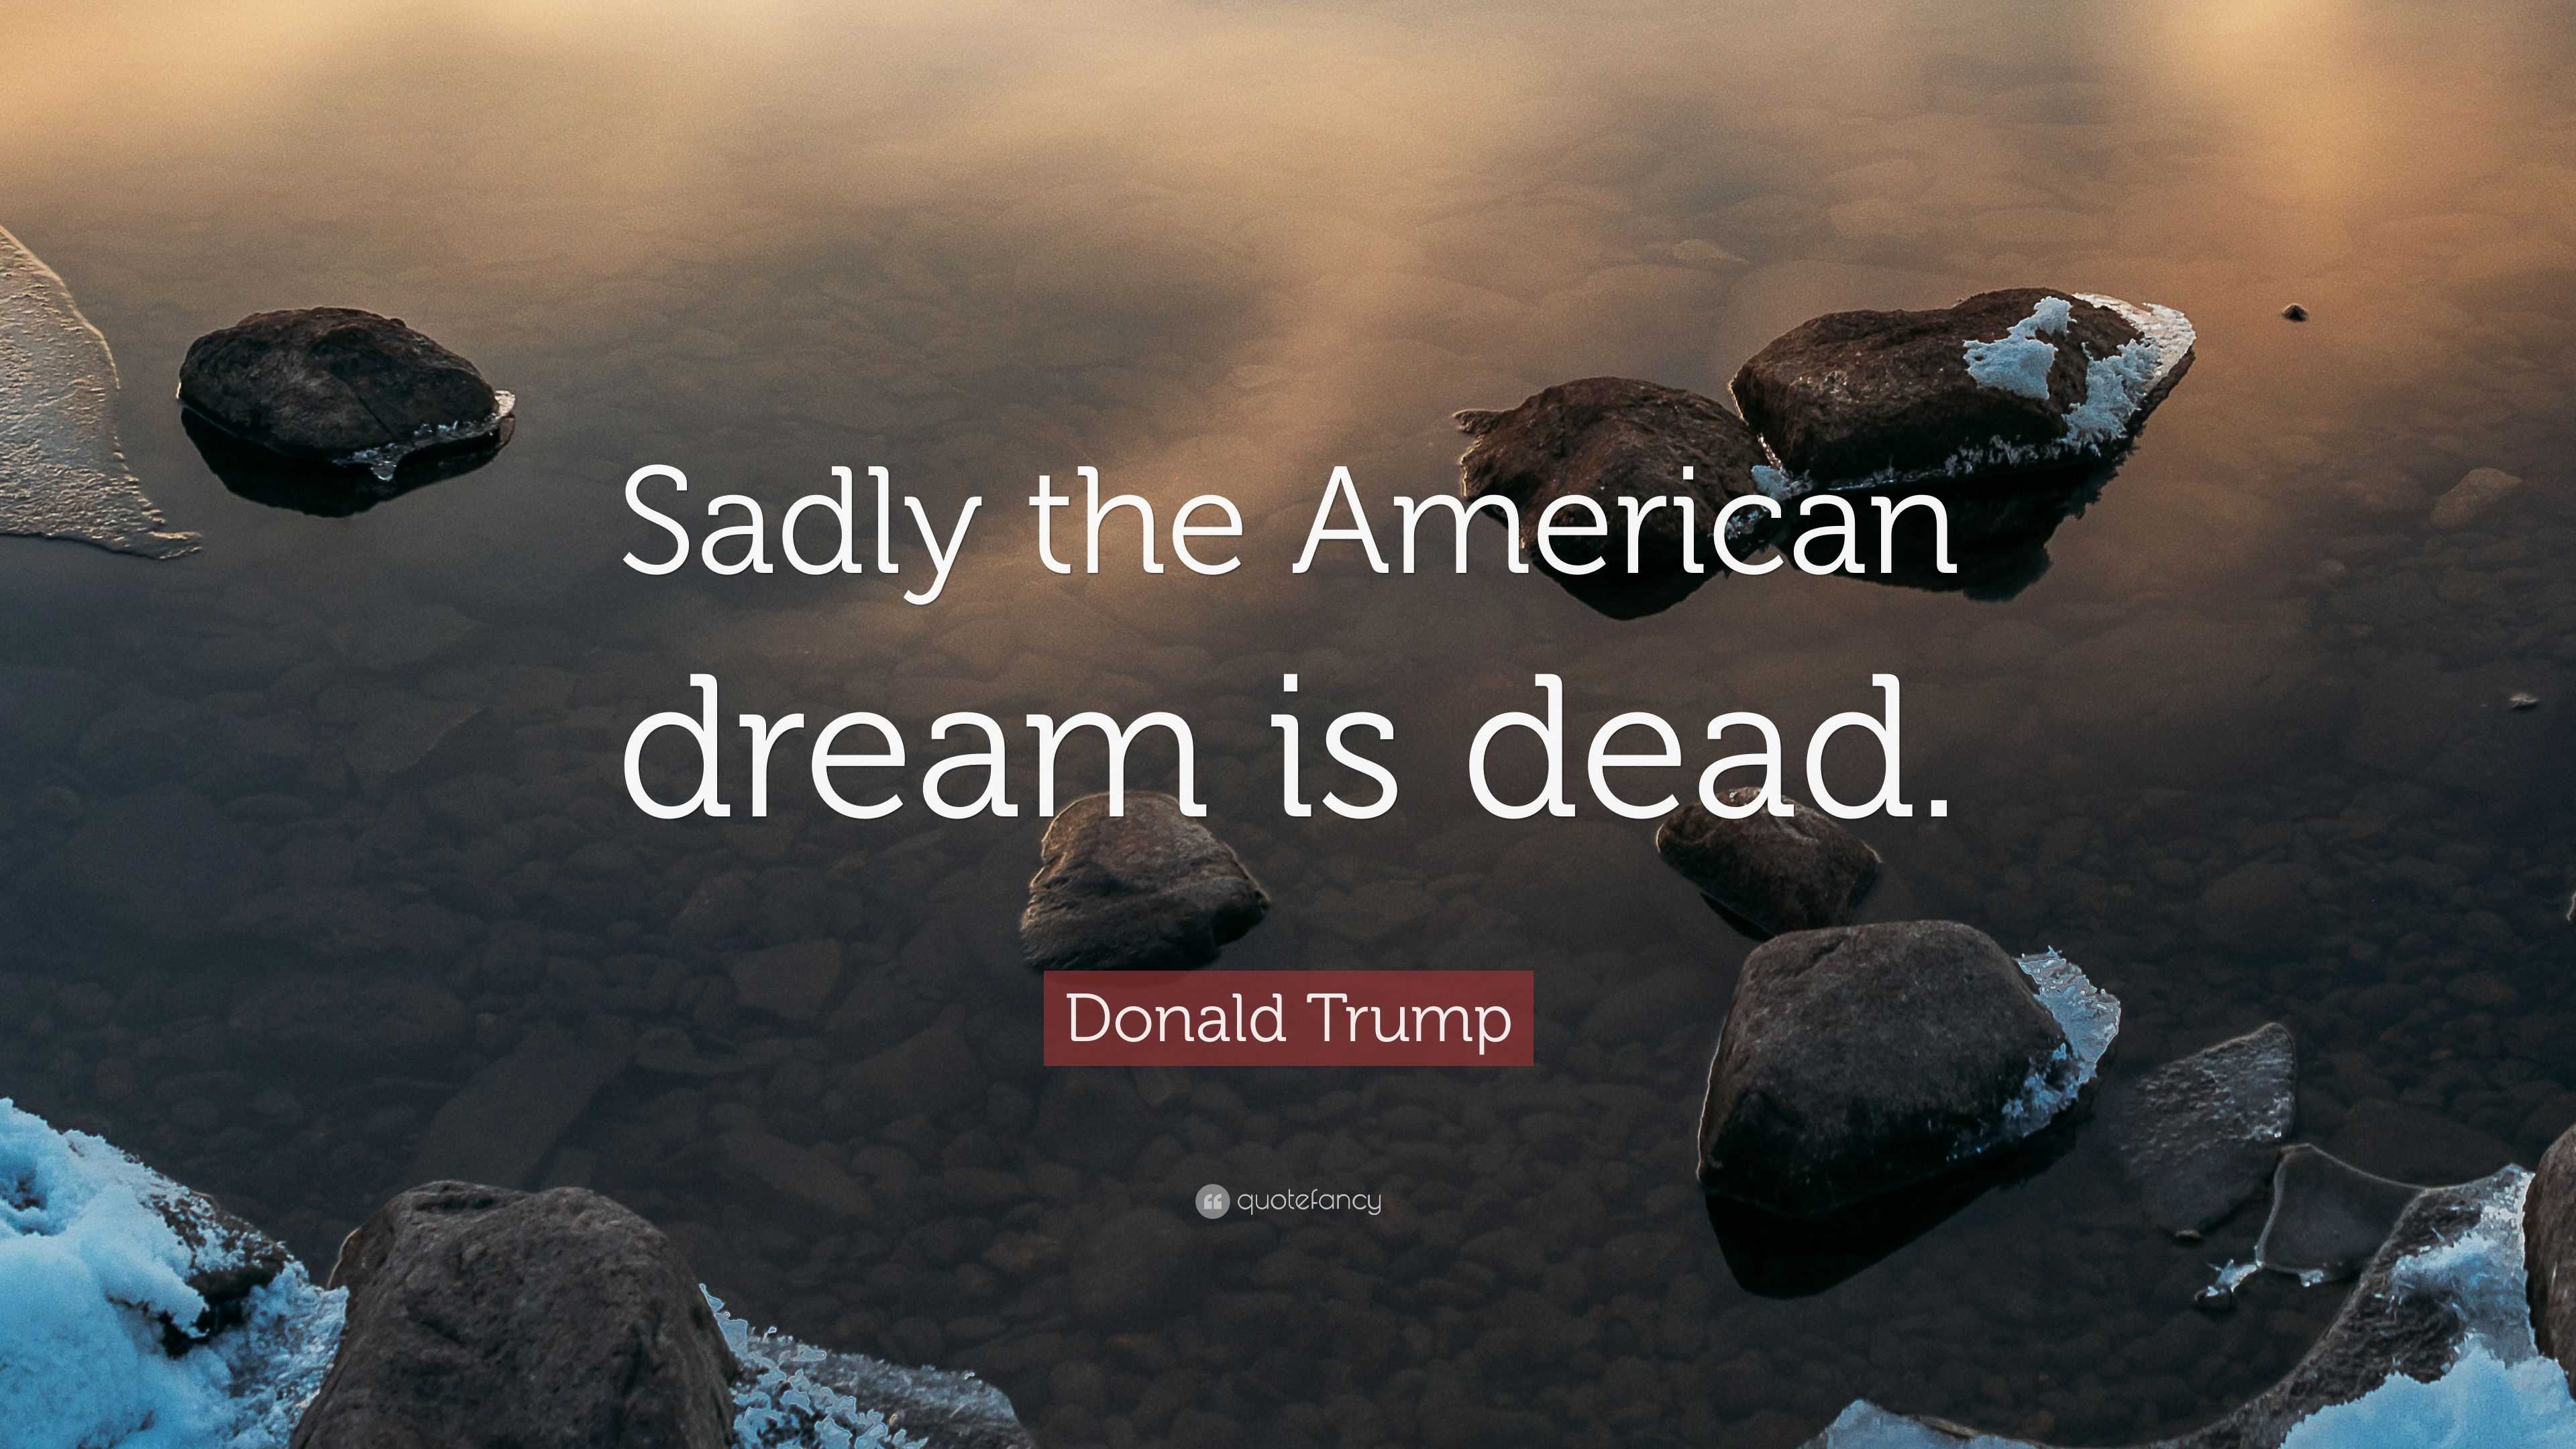 2081390 Donald Trump Quote Sadly the American dream is dead